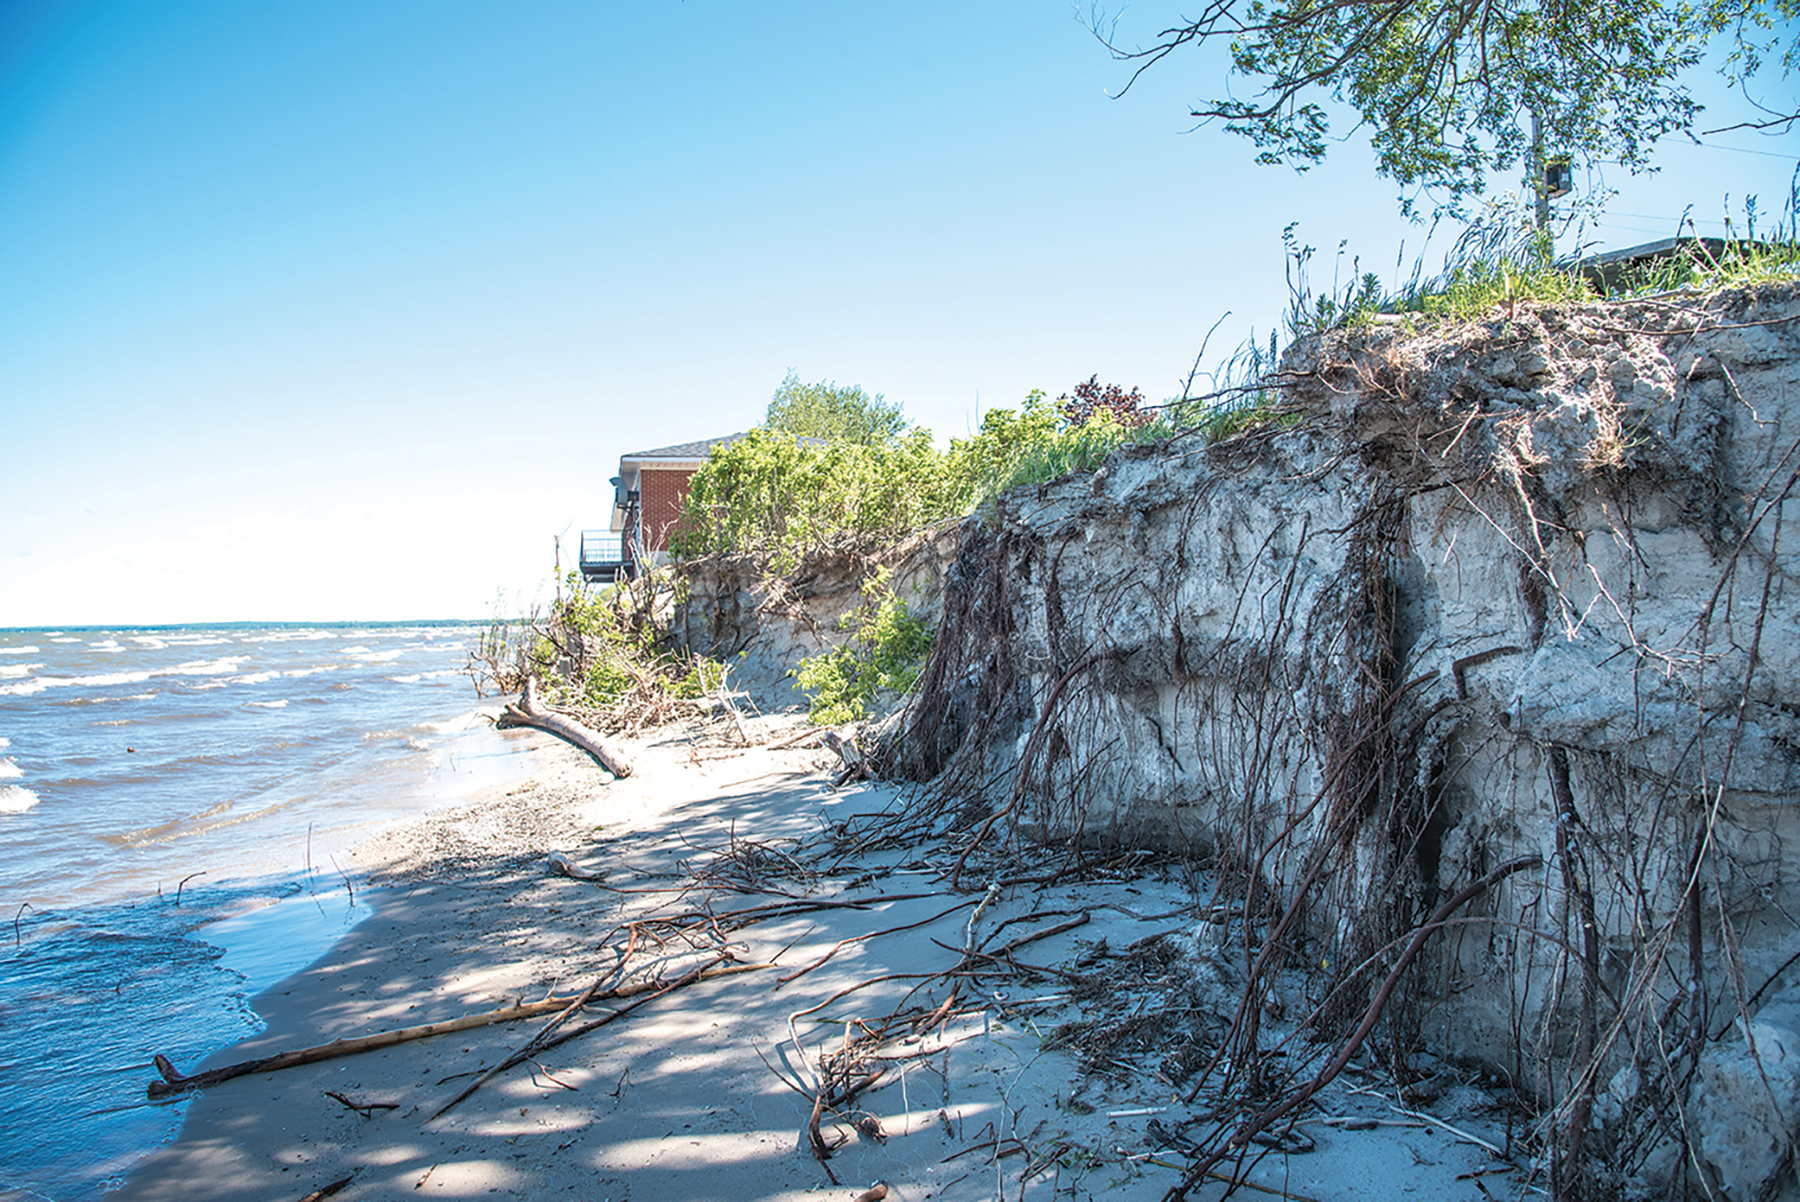 Tree roots are exposed after a sand slope washes away at Beach Area 3